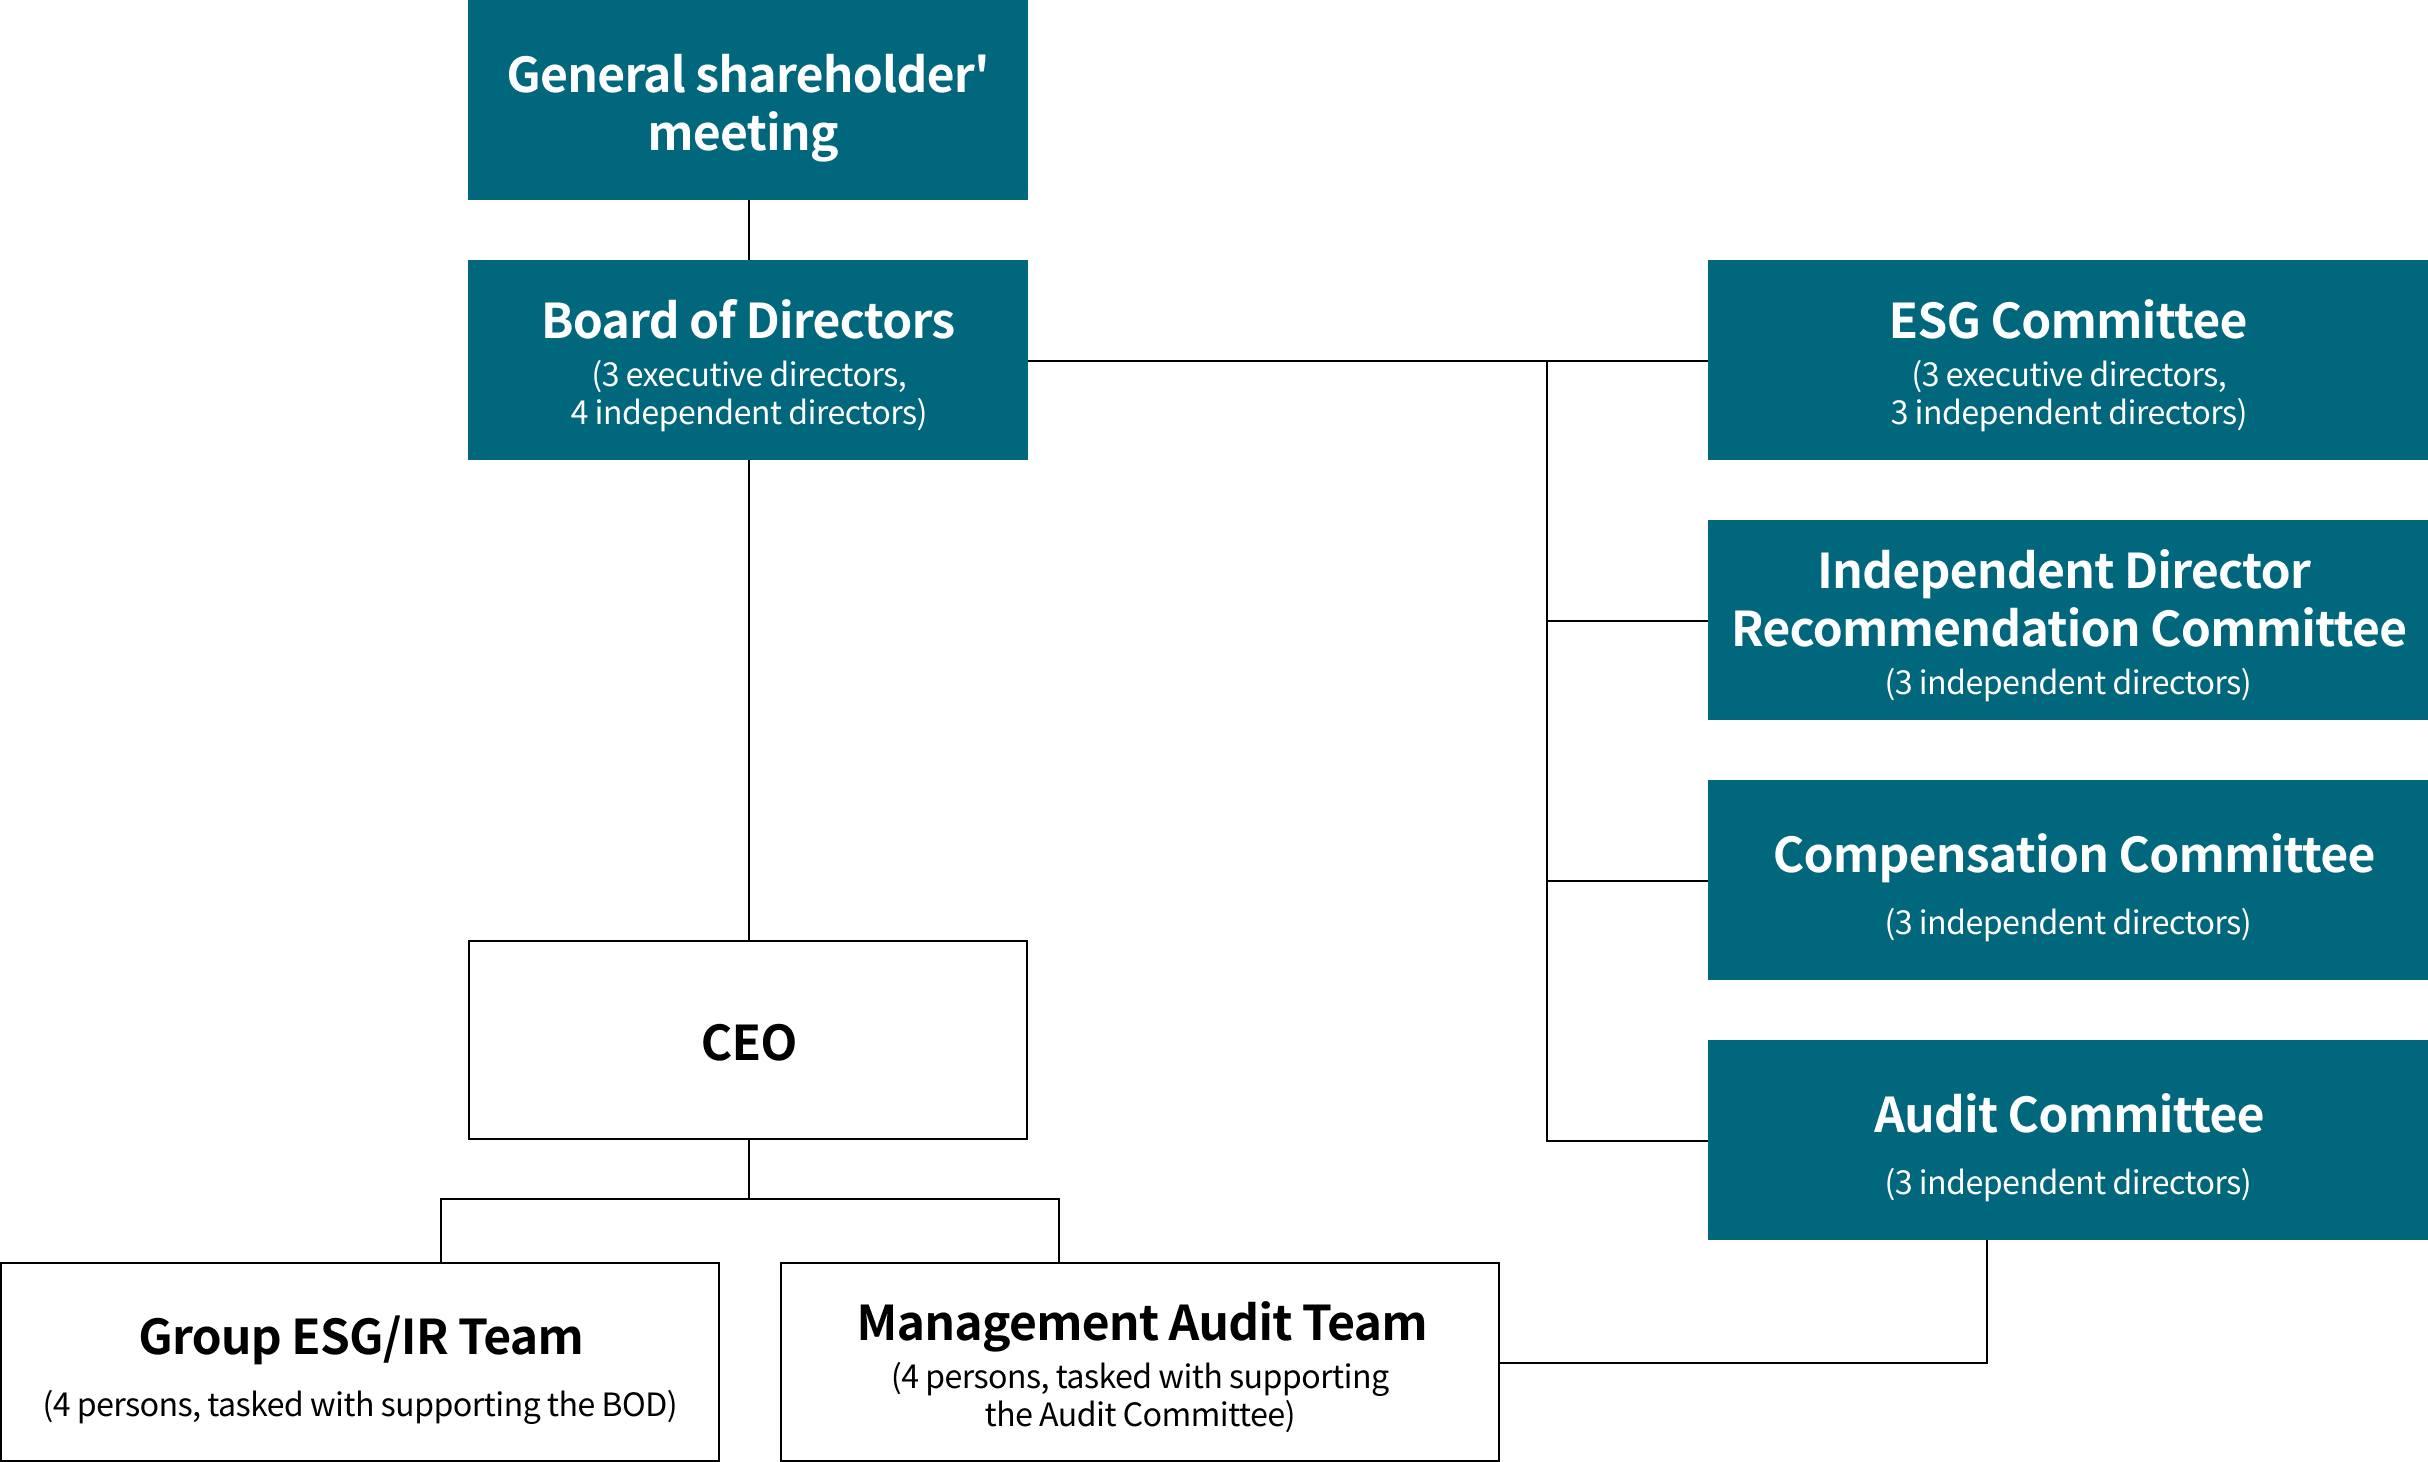 Organizational structure of the Board of Directors